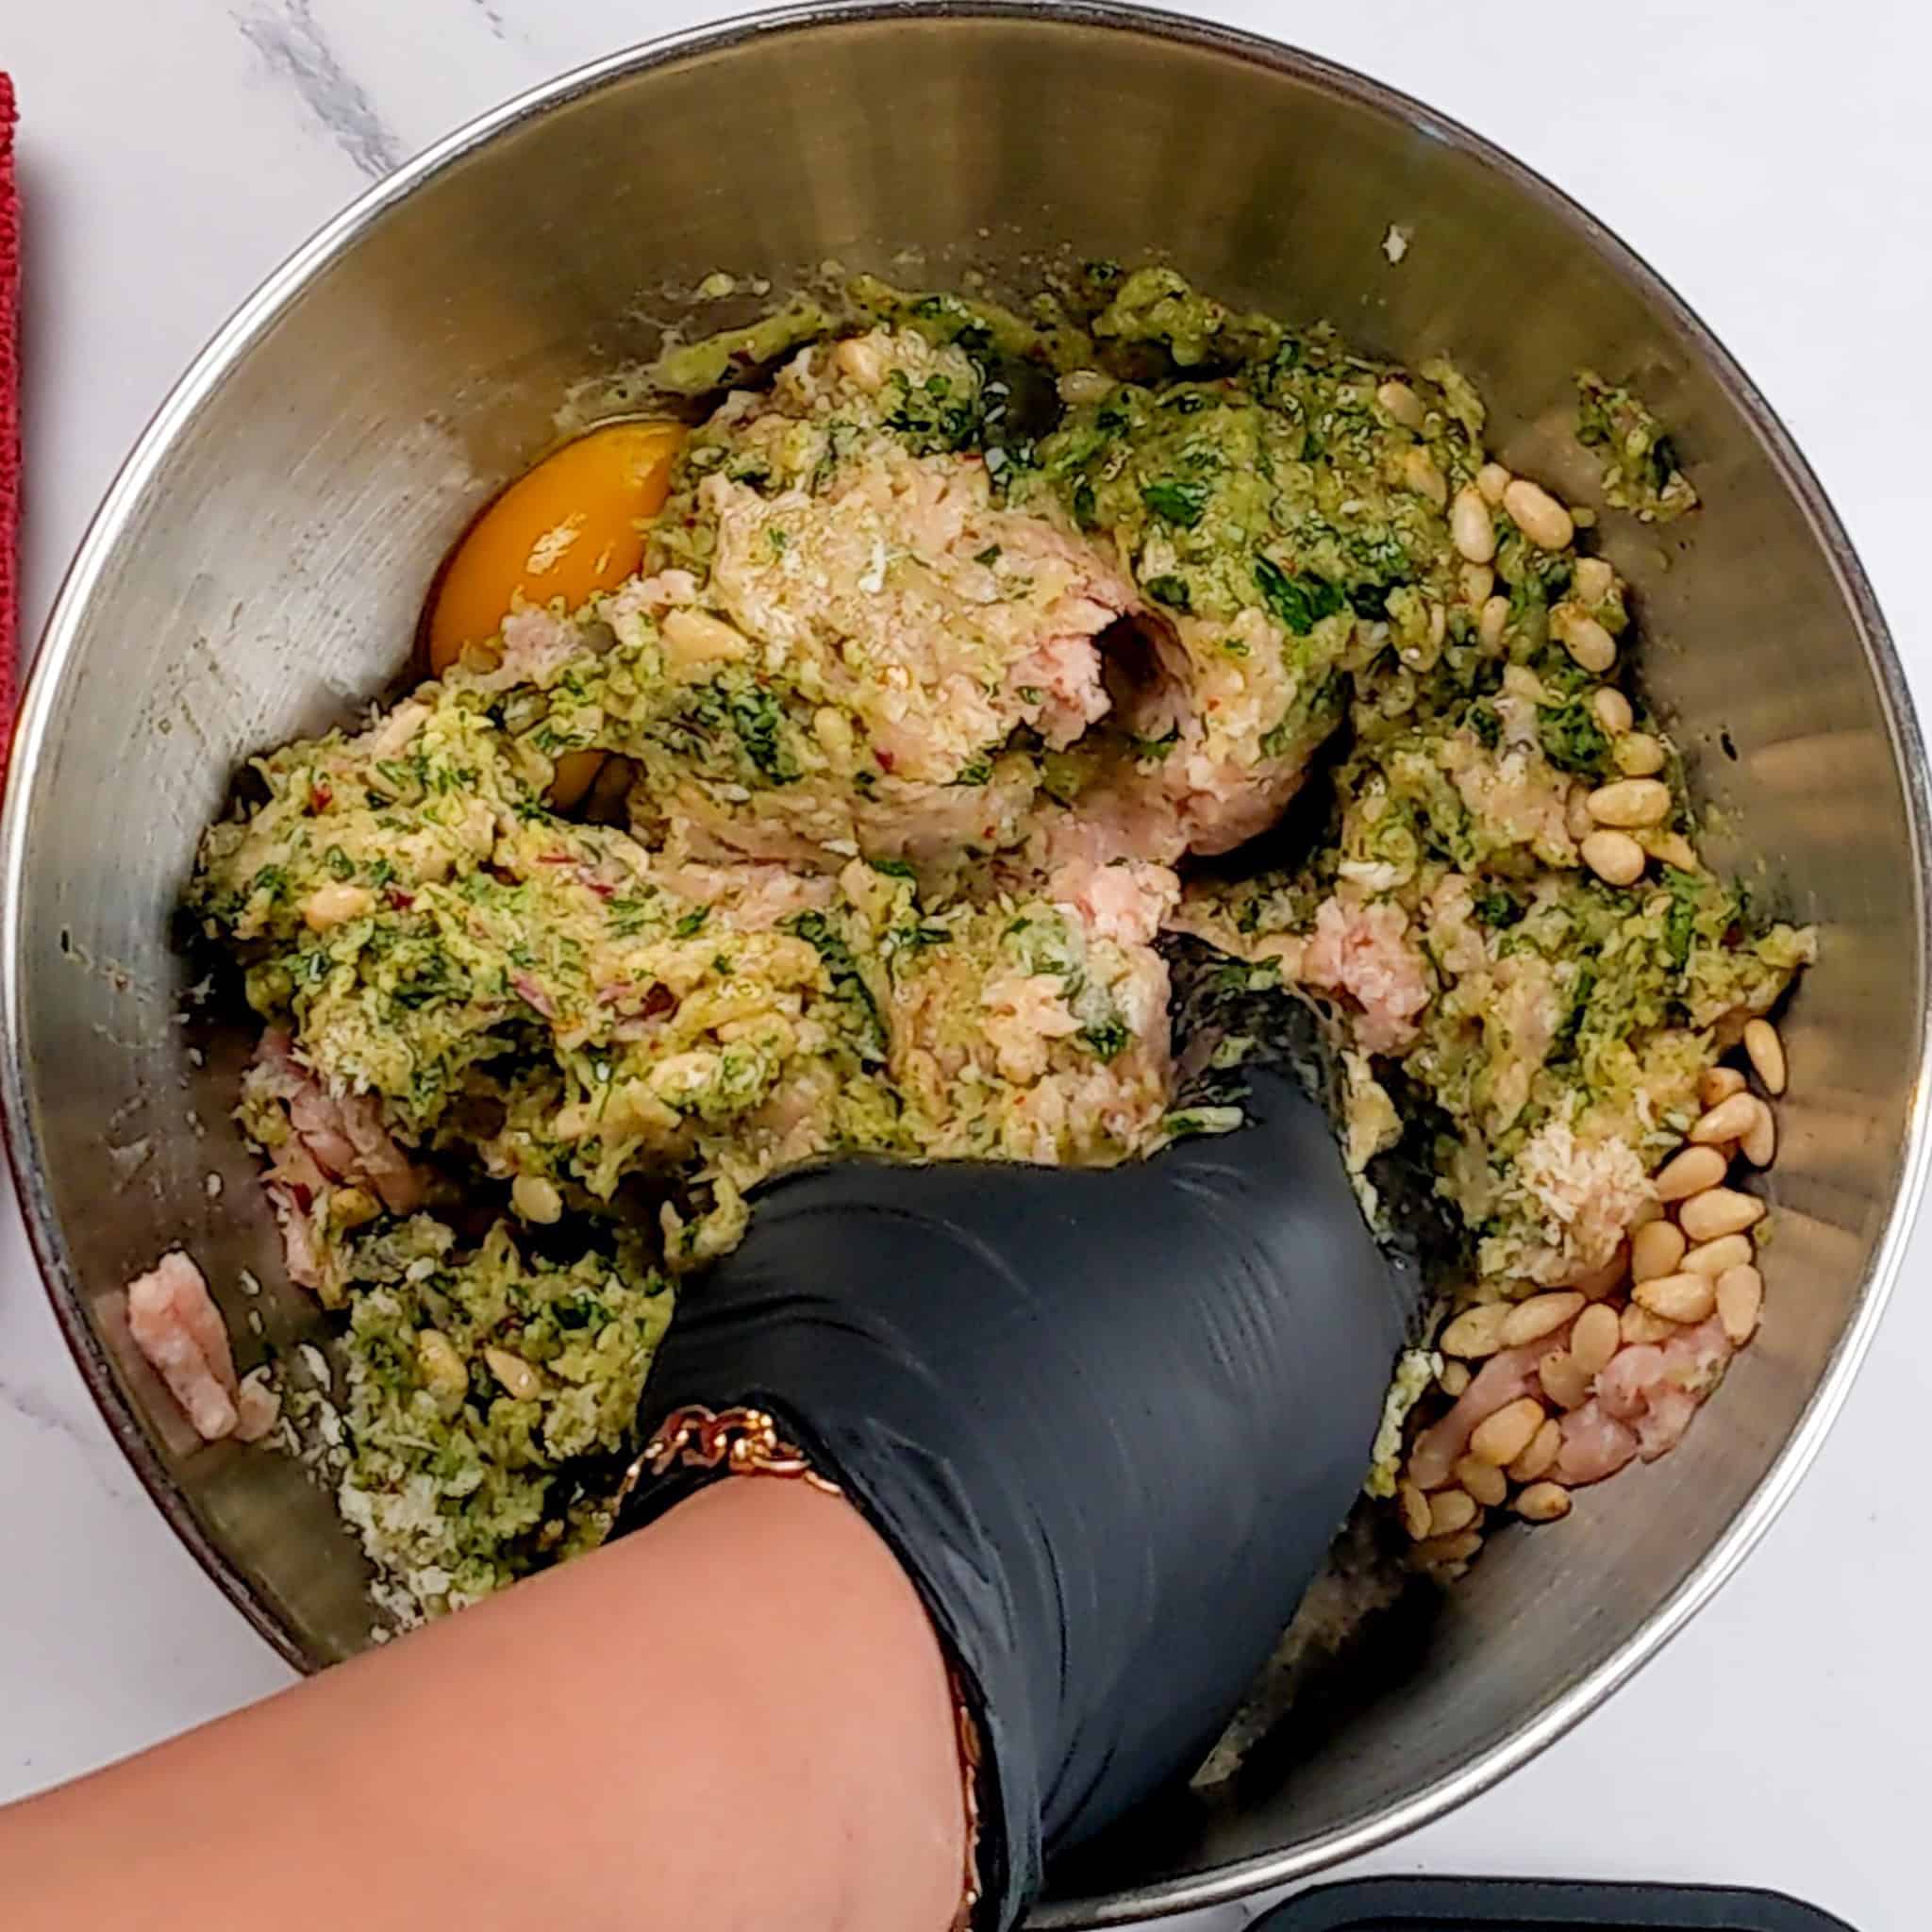 a stainless steel bowl with the meatball mixture being combined with a gloved hand.